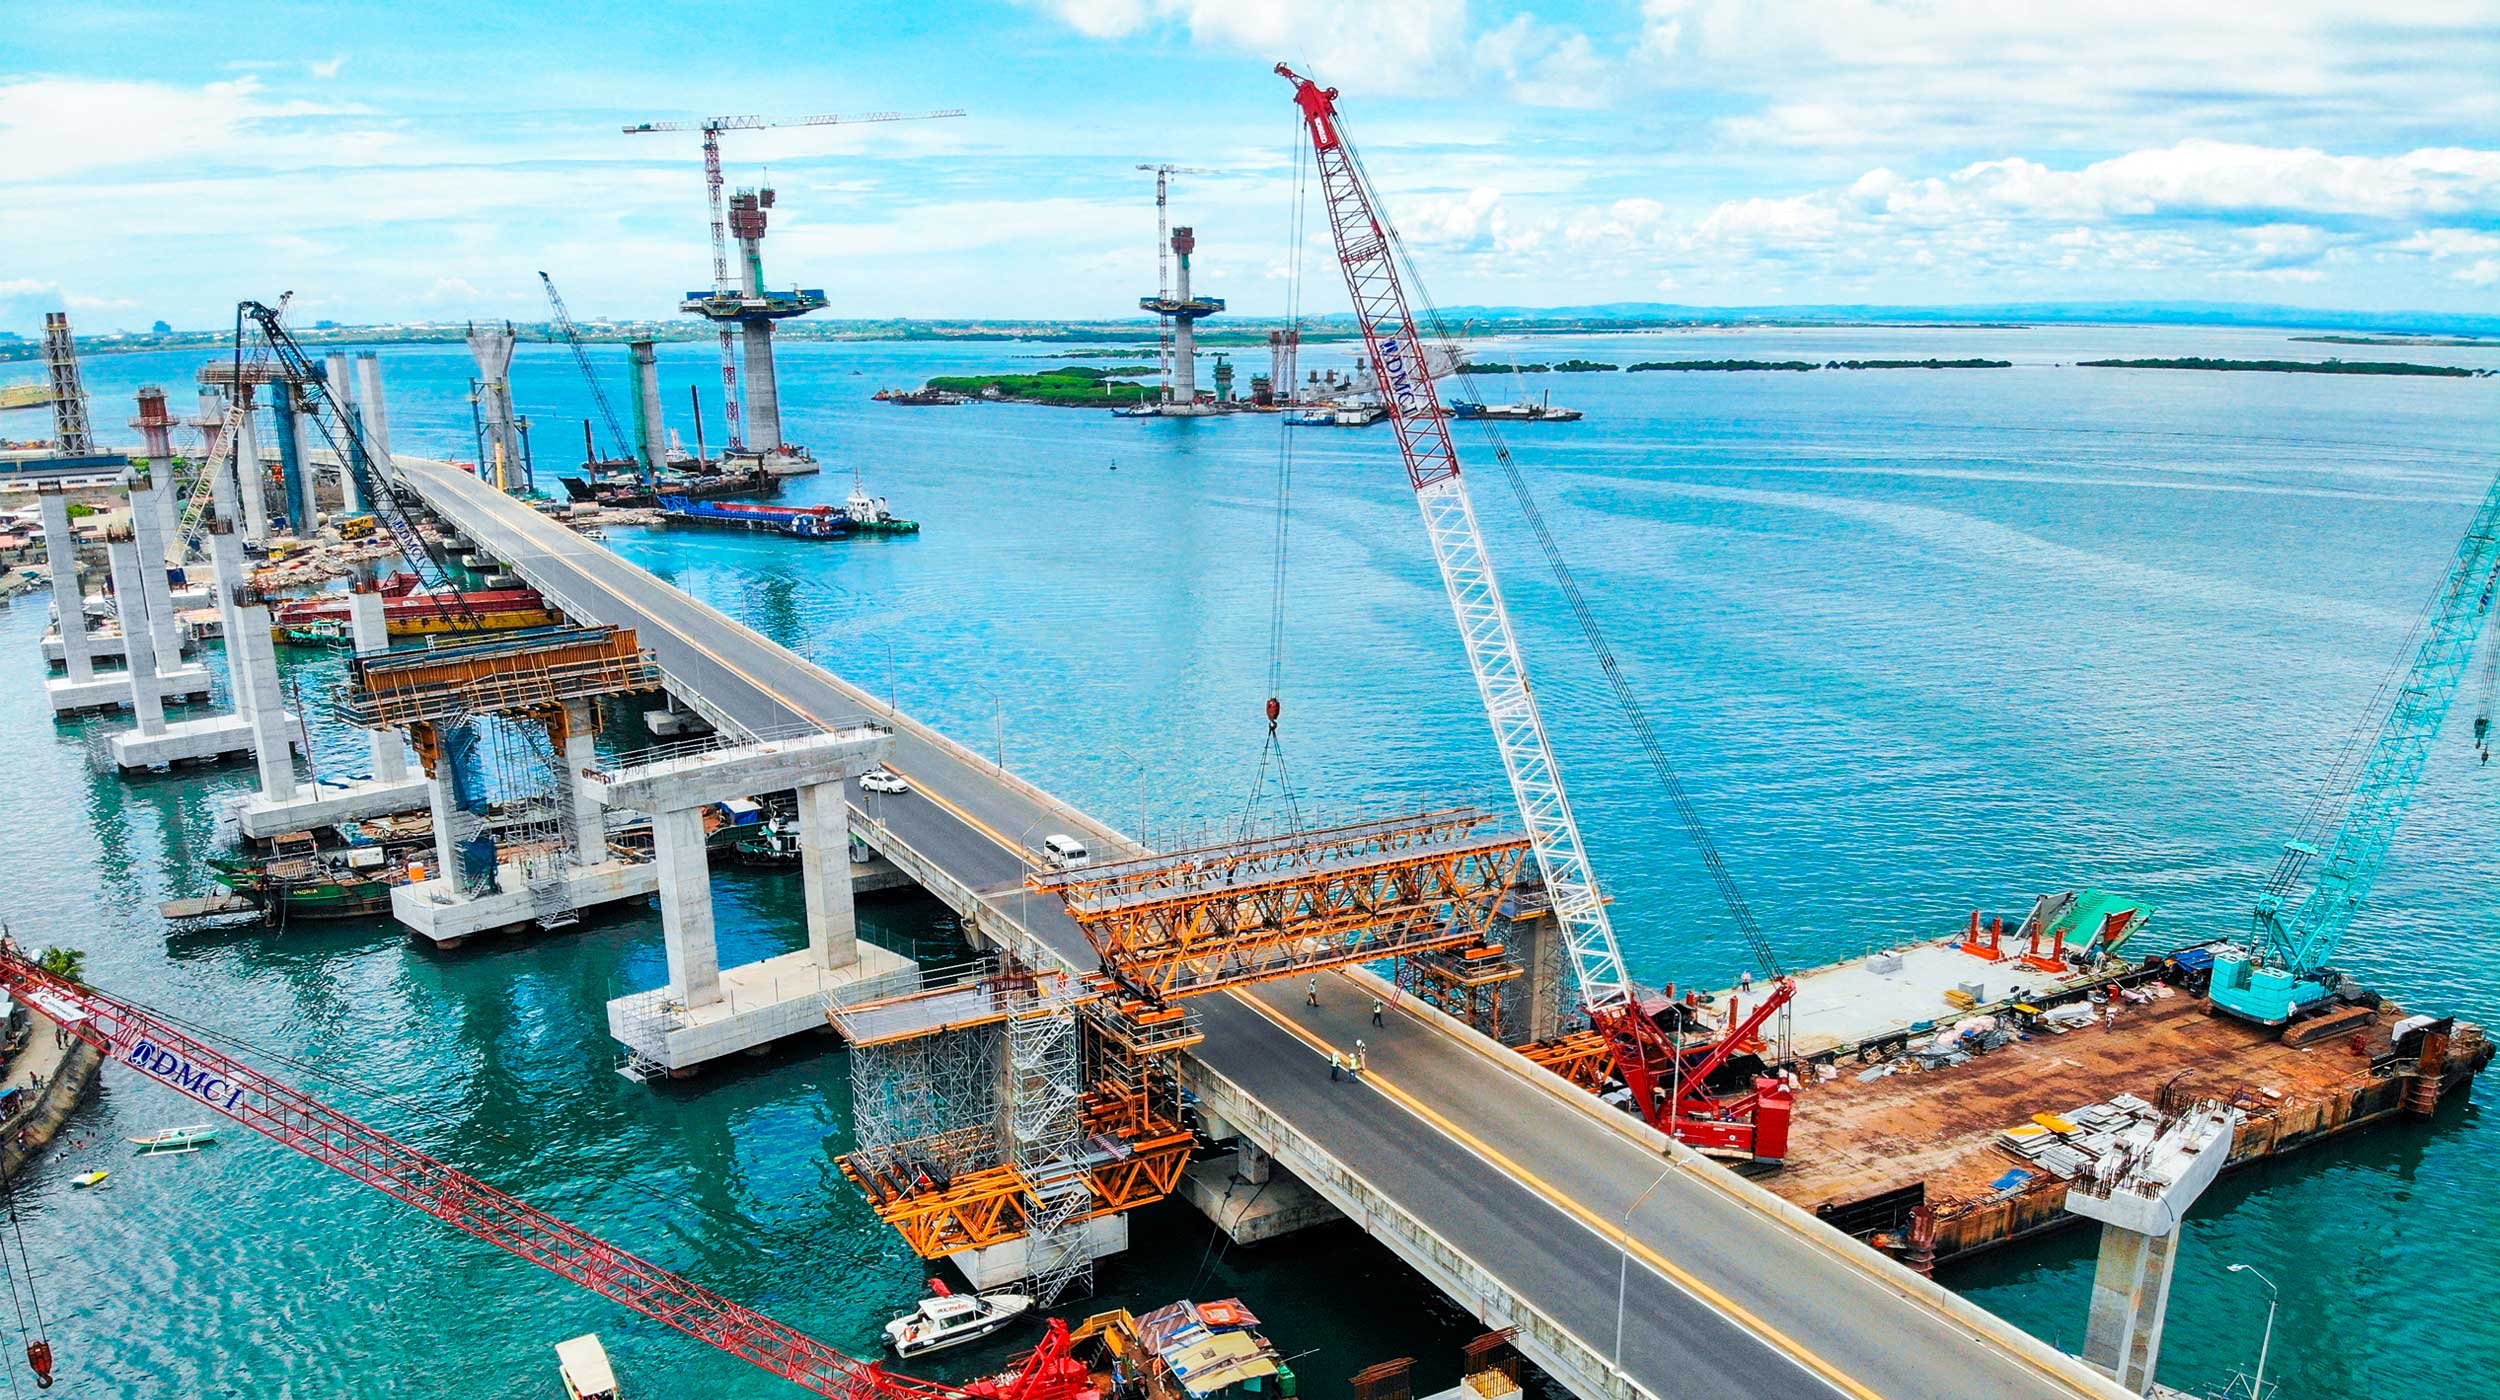 The Cebu - Cordova Link Expressway is Cebu's most anticipated infrastructure project and one of the largest in the Philippines. It aims to alleviate the heavy traffic between Cordova – the capital of Cebu Island and the second largest city in the Philippines – and Mactan.